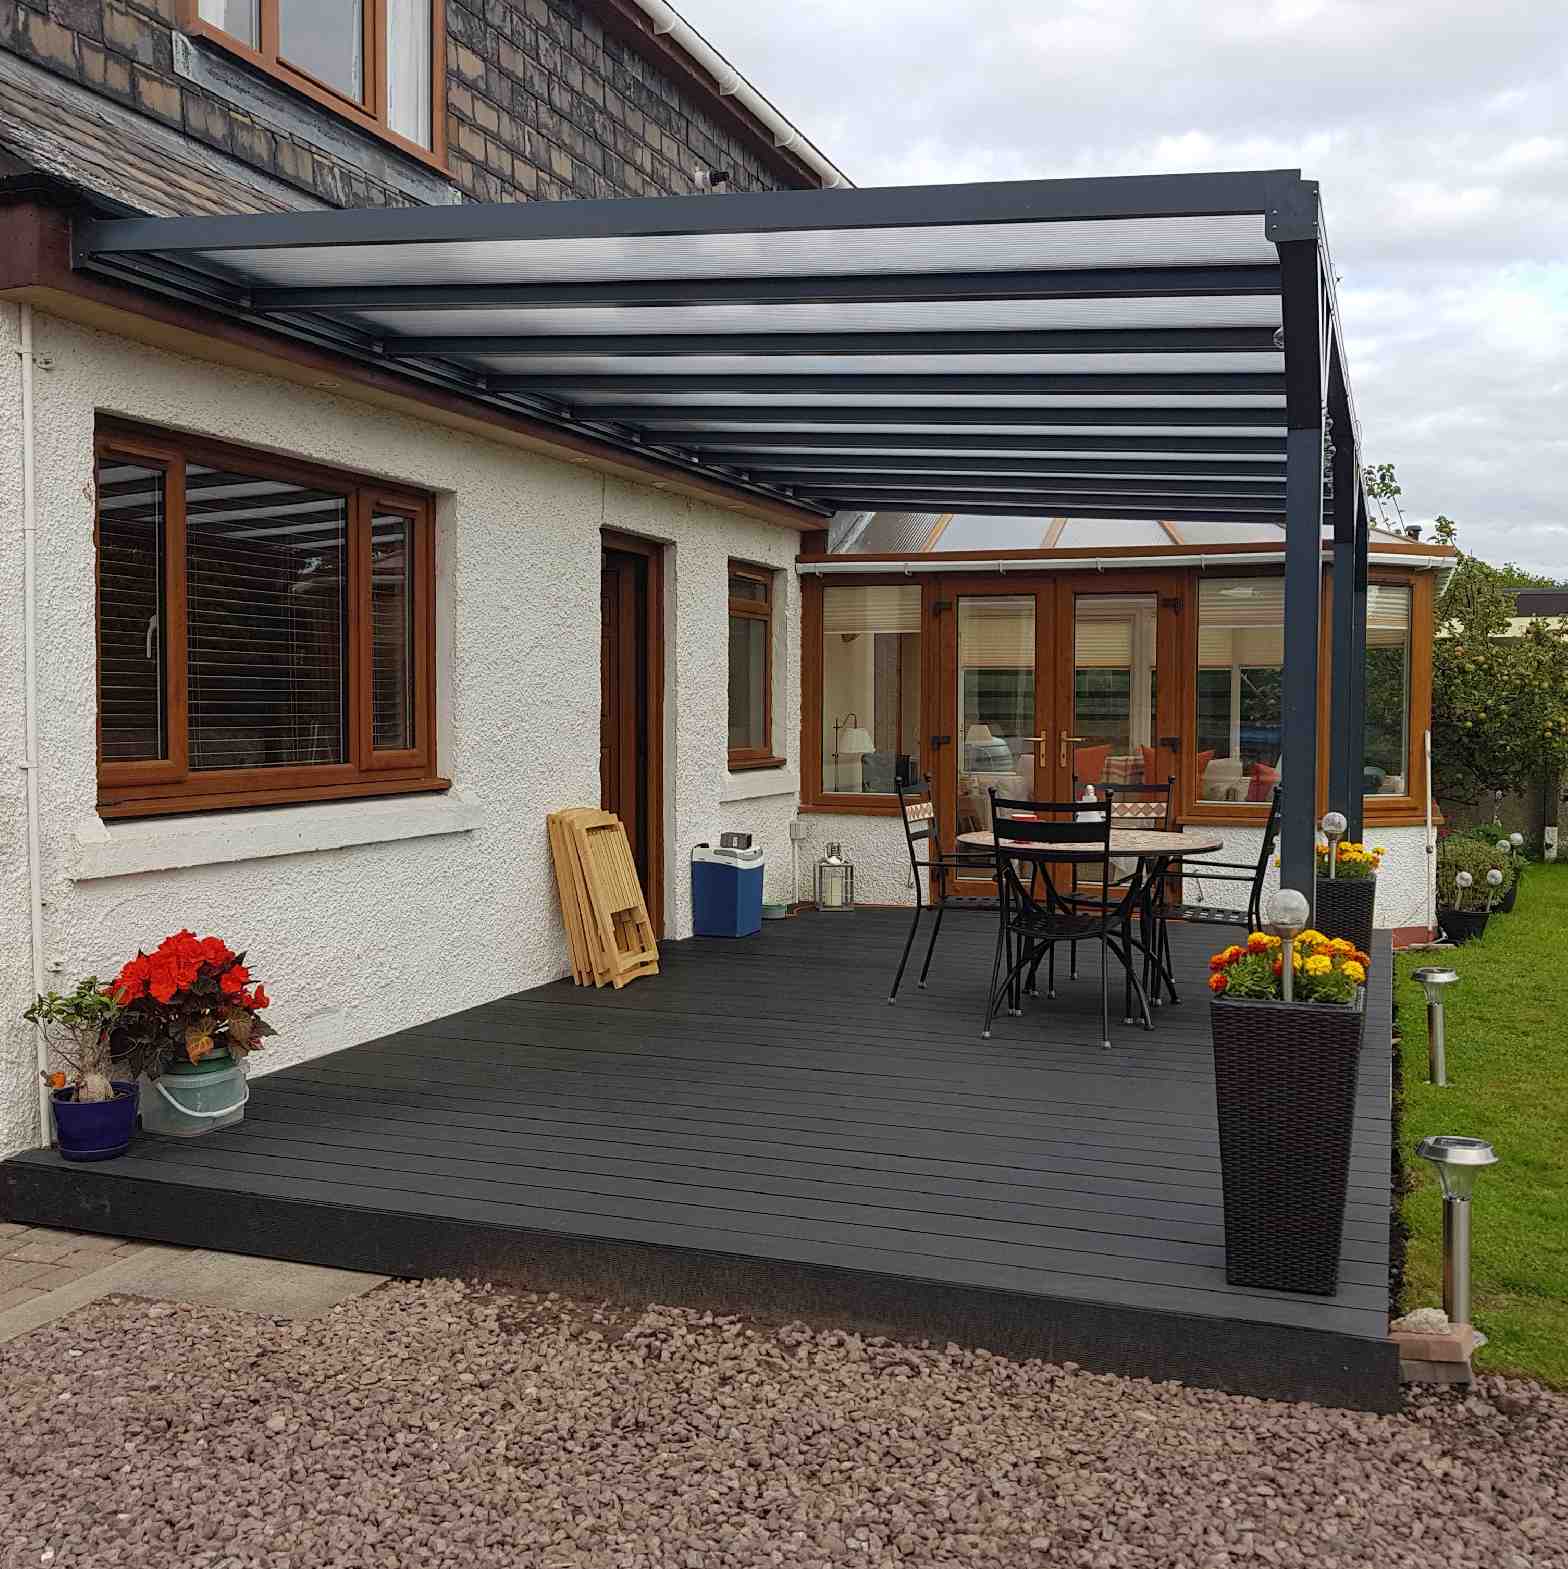 Buy Omega Verandah, Anthracite Grey, 16mm Polycarbonate Glazing - 3.1m (W) x 2.5m (P), (2) Supporting Posts online today